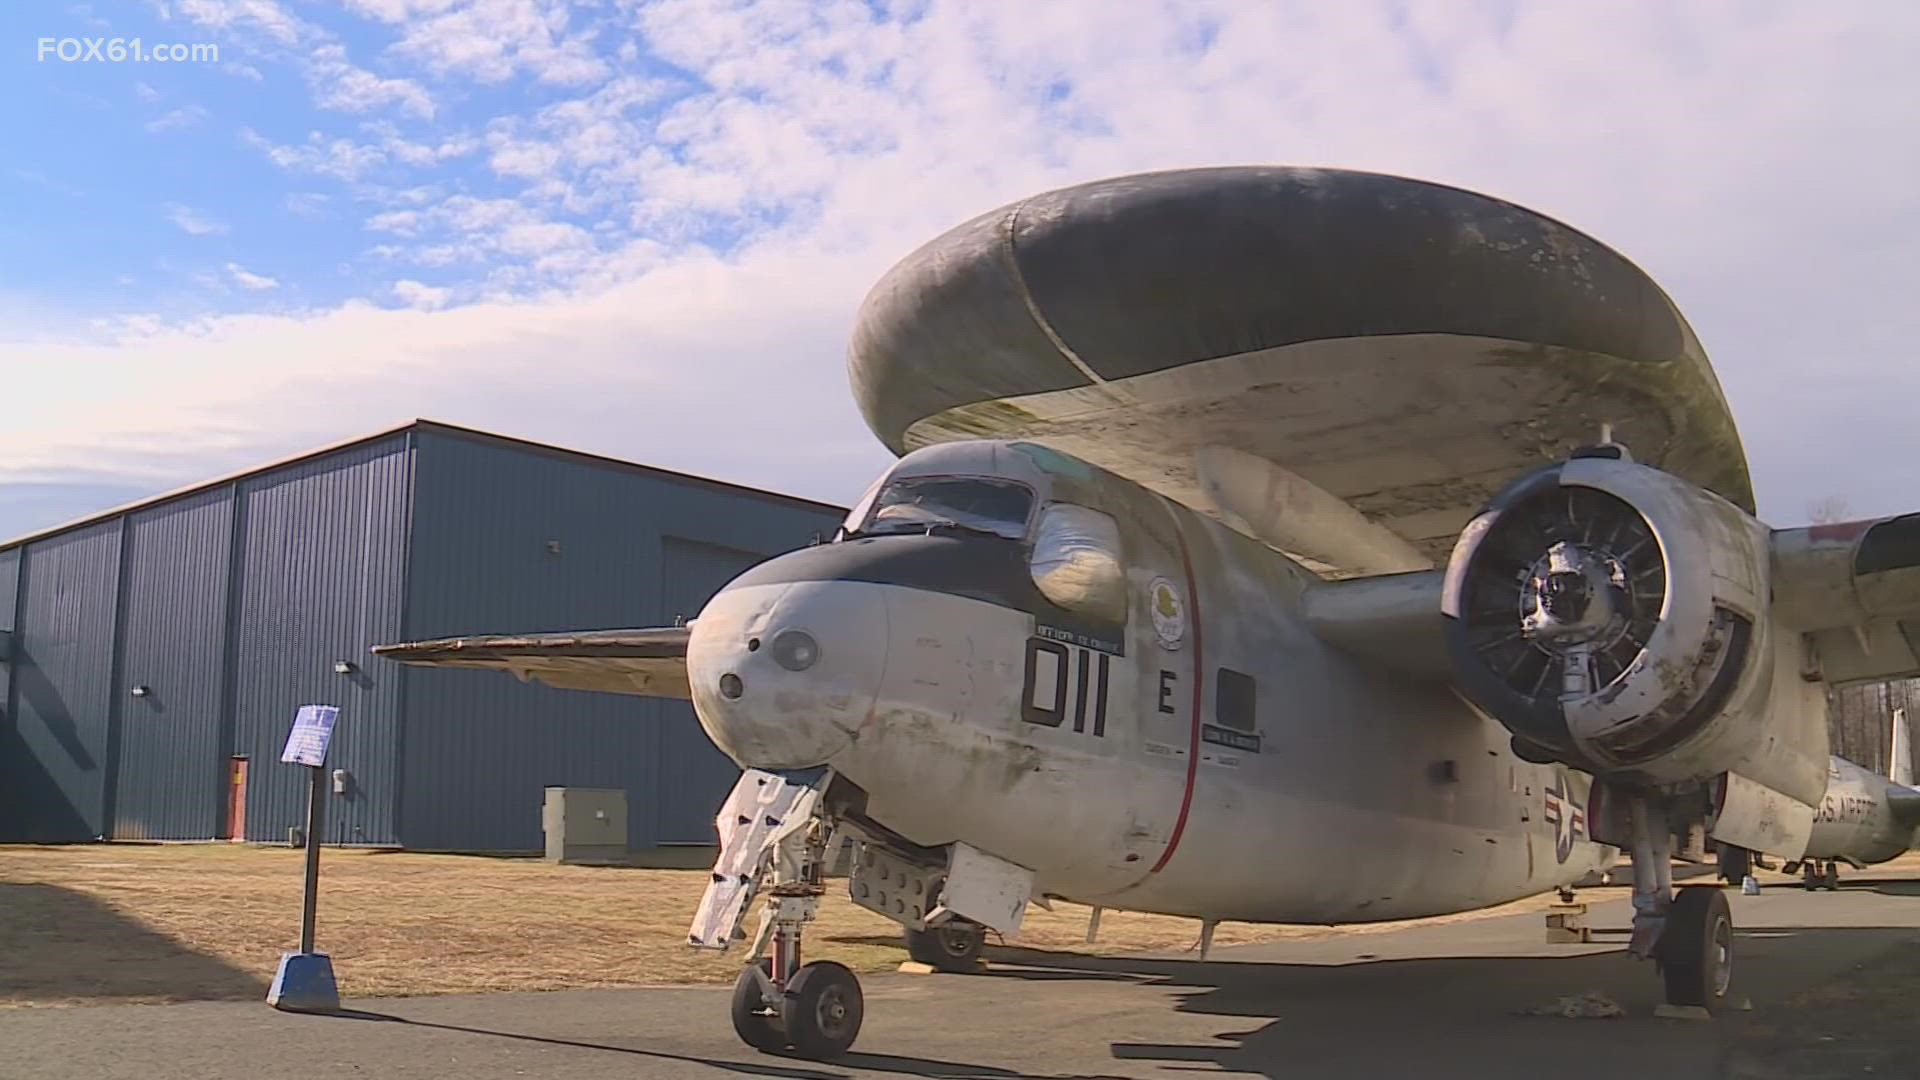 Inside a Windsor Locks hangar, volunteers hammer and drill away at preserving and restoring some of the most iconic planes to ever take to the skies.